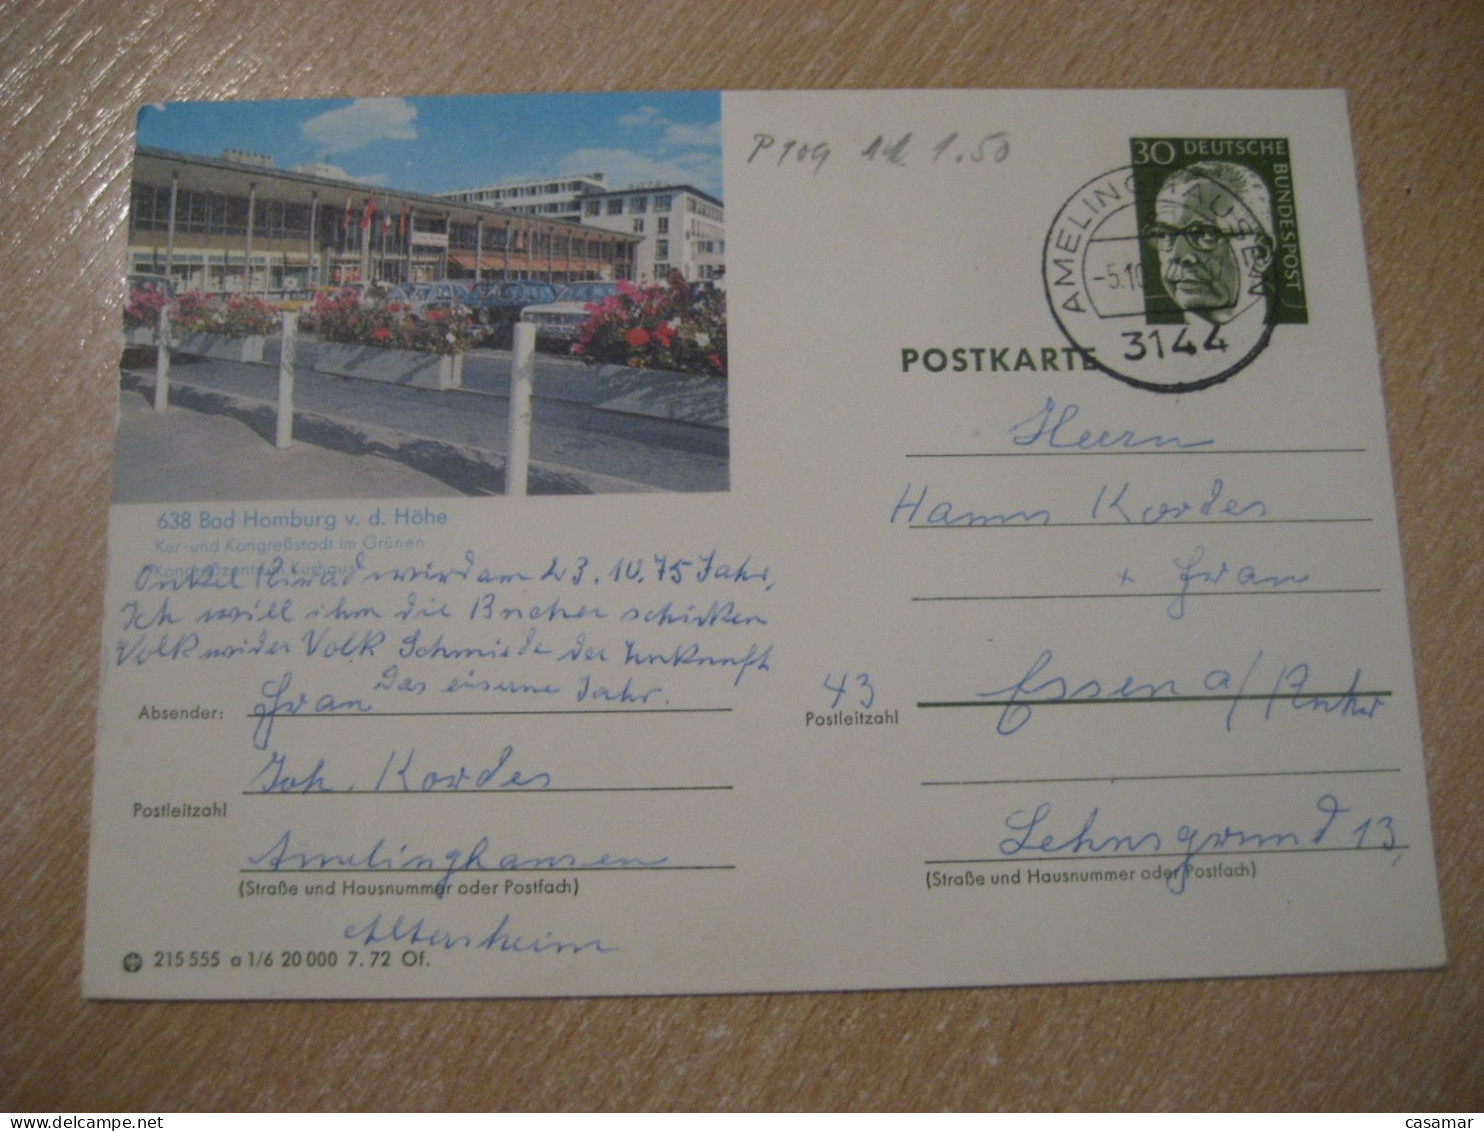 AMELINGHAUSEN 1972 To Essen Cancel BAD HOMBURG V. D. HOHE Postal Stationery Card GERMANY - Covers & Documents